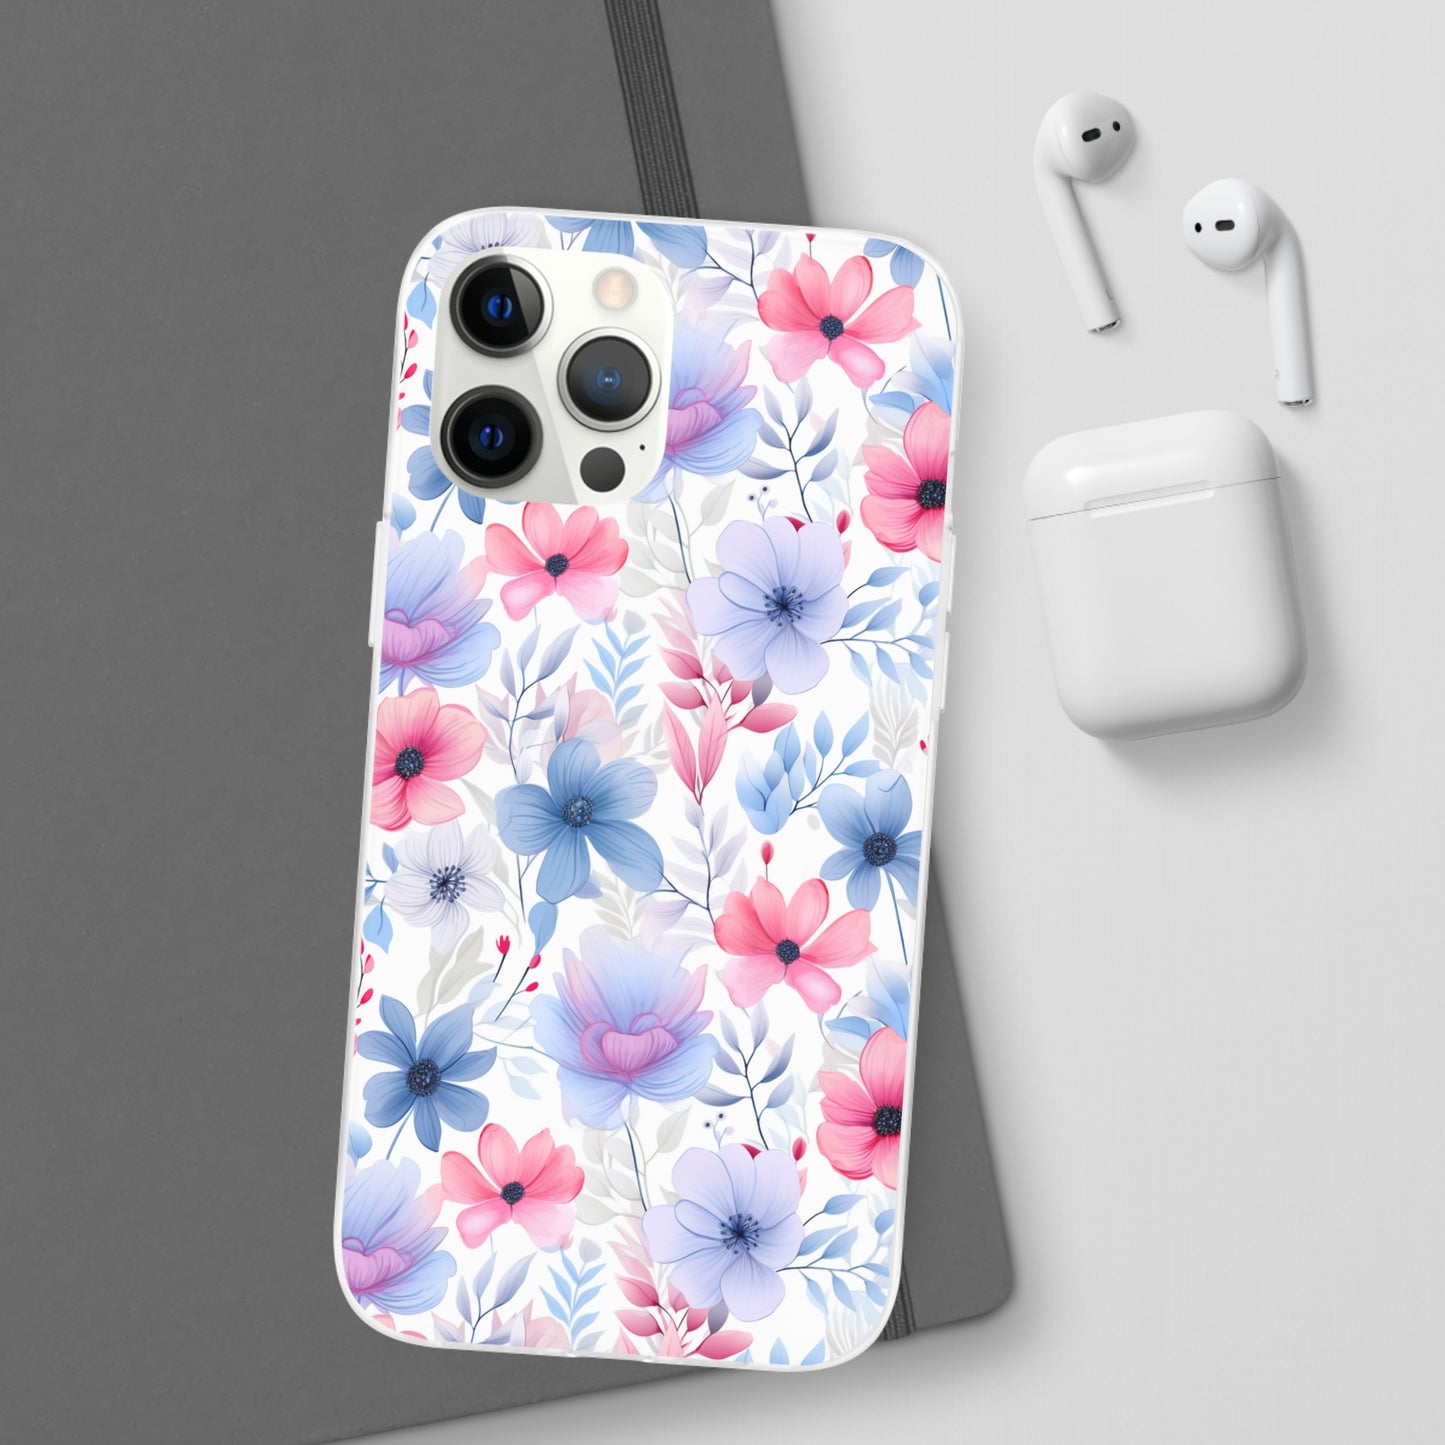 Floral Whispers - Soft Hues of Violets, Pinks, and Blues - Flexi Phone Case Phone Case Pattern Symphony iPhone 12 Pro Max with gift packaging  